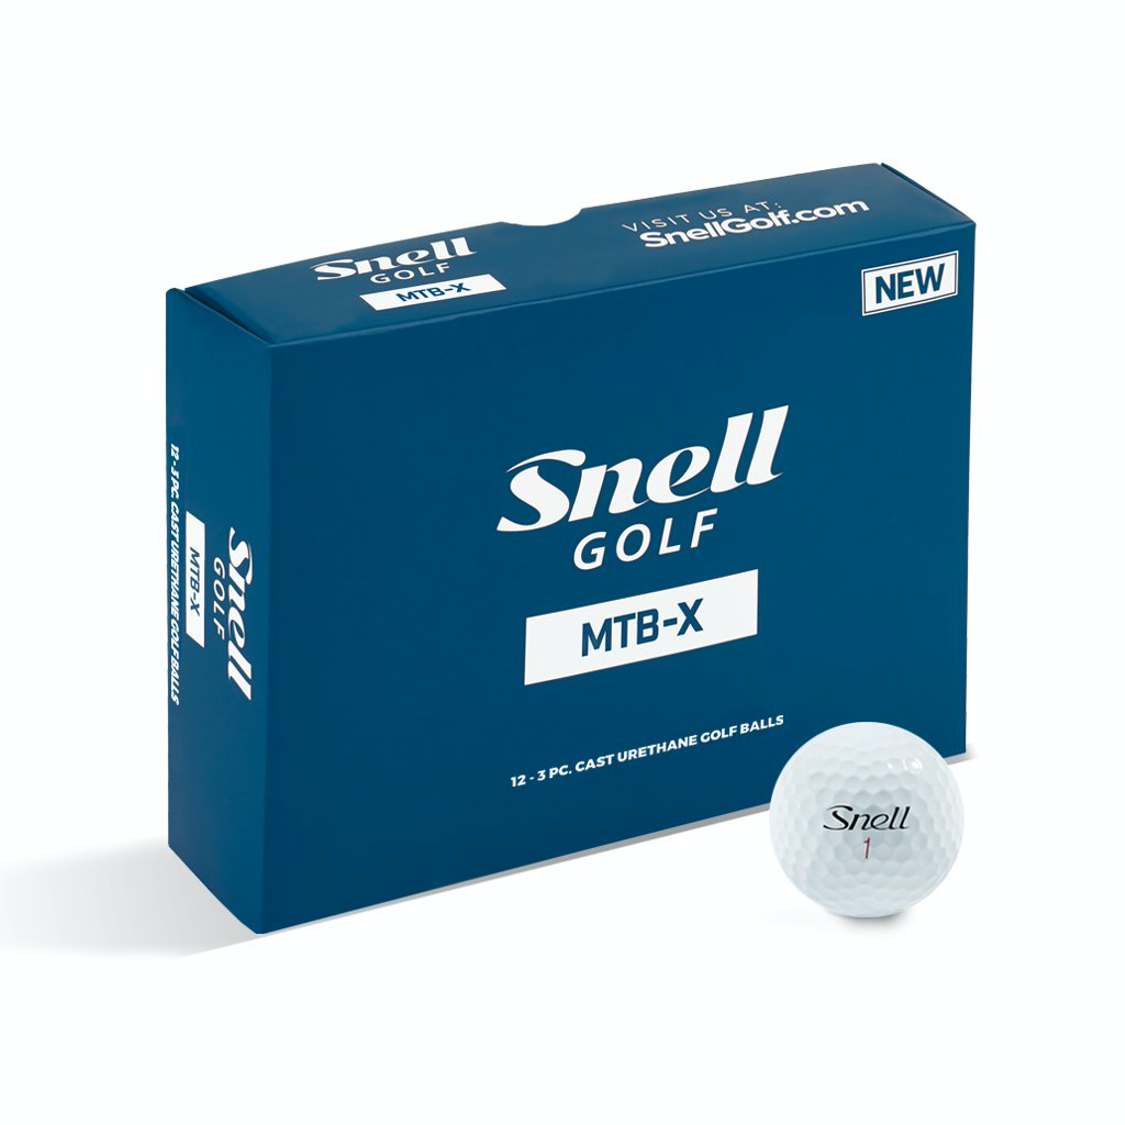 Snell golf balls with Shapland logo